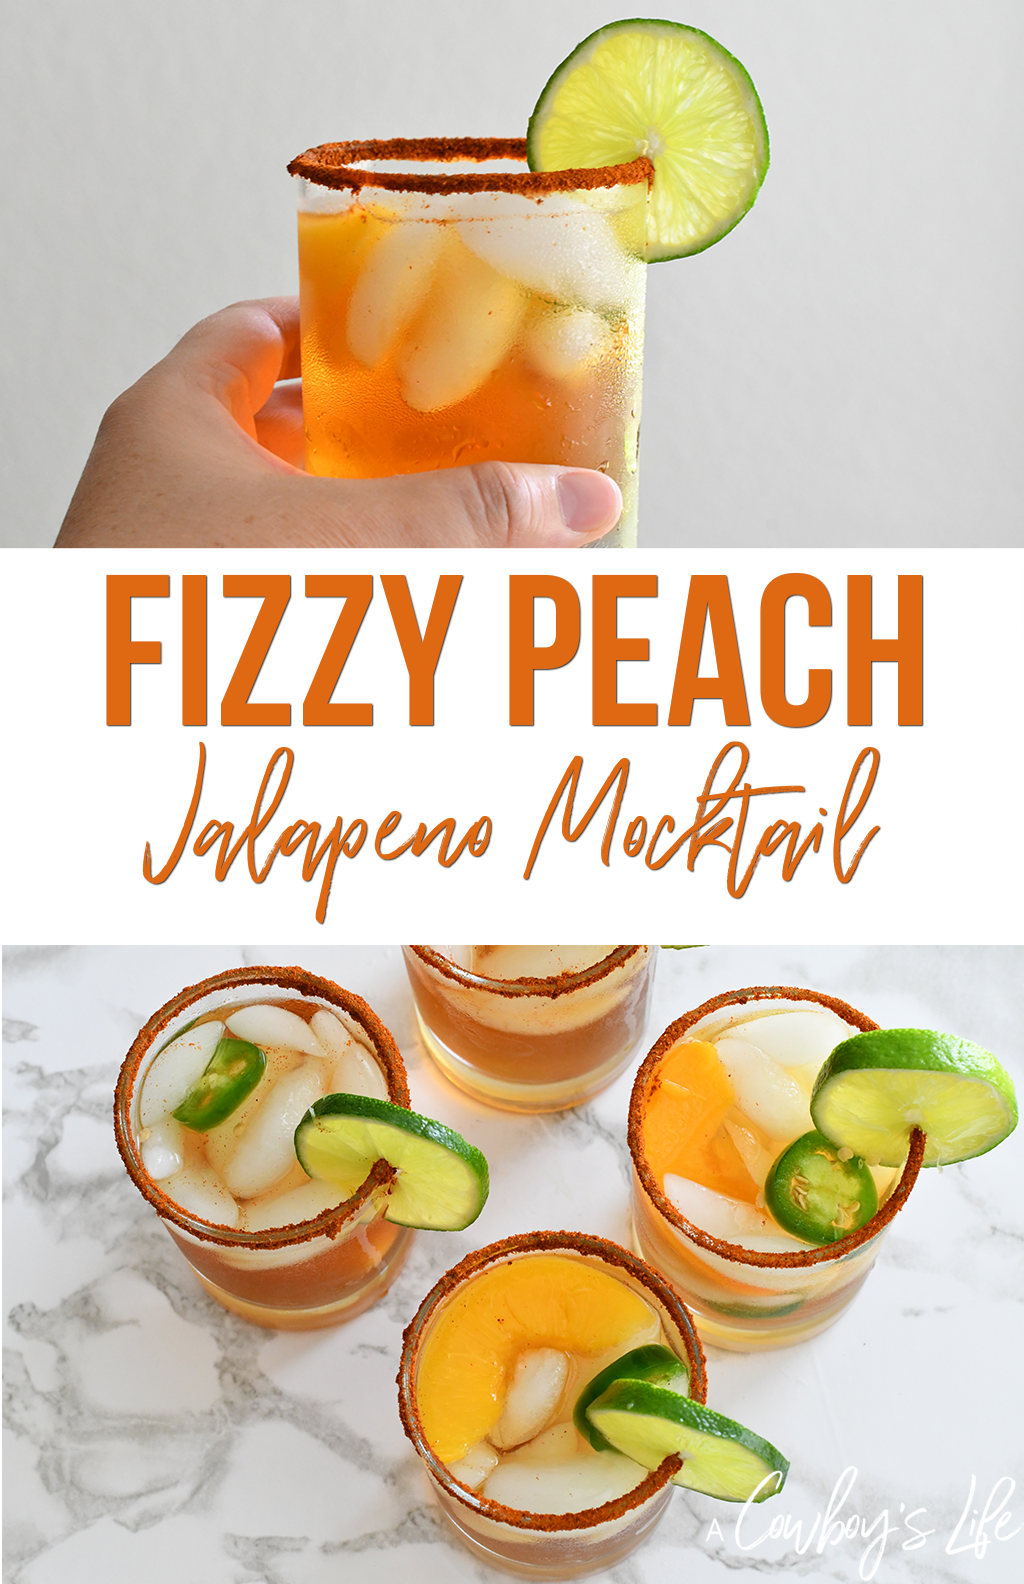 This fizzy peach jalapeño mocktail is a delicious and refreshing drink to enjoy this summer.